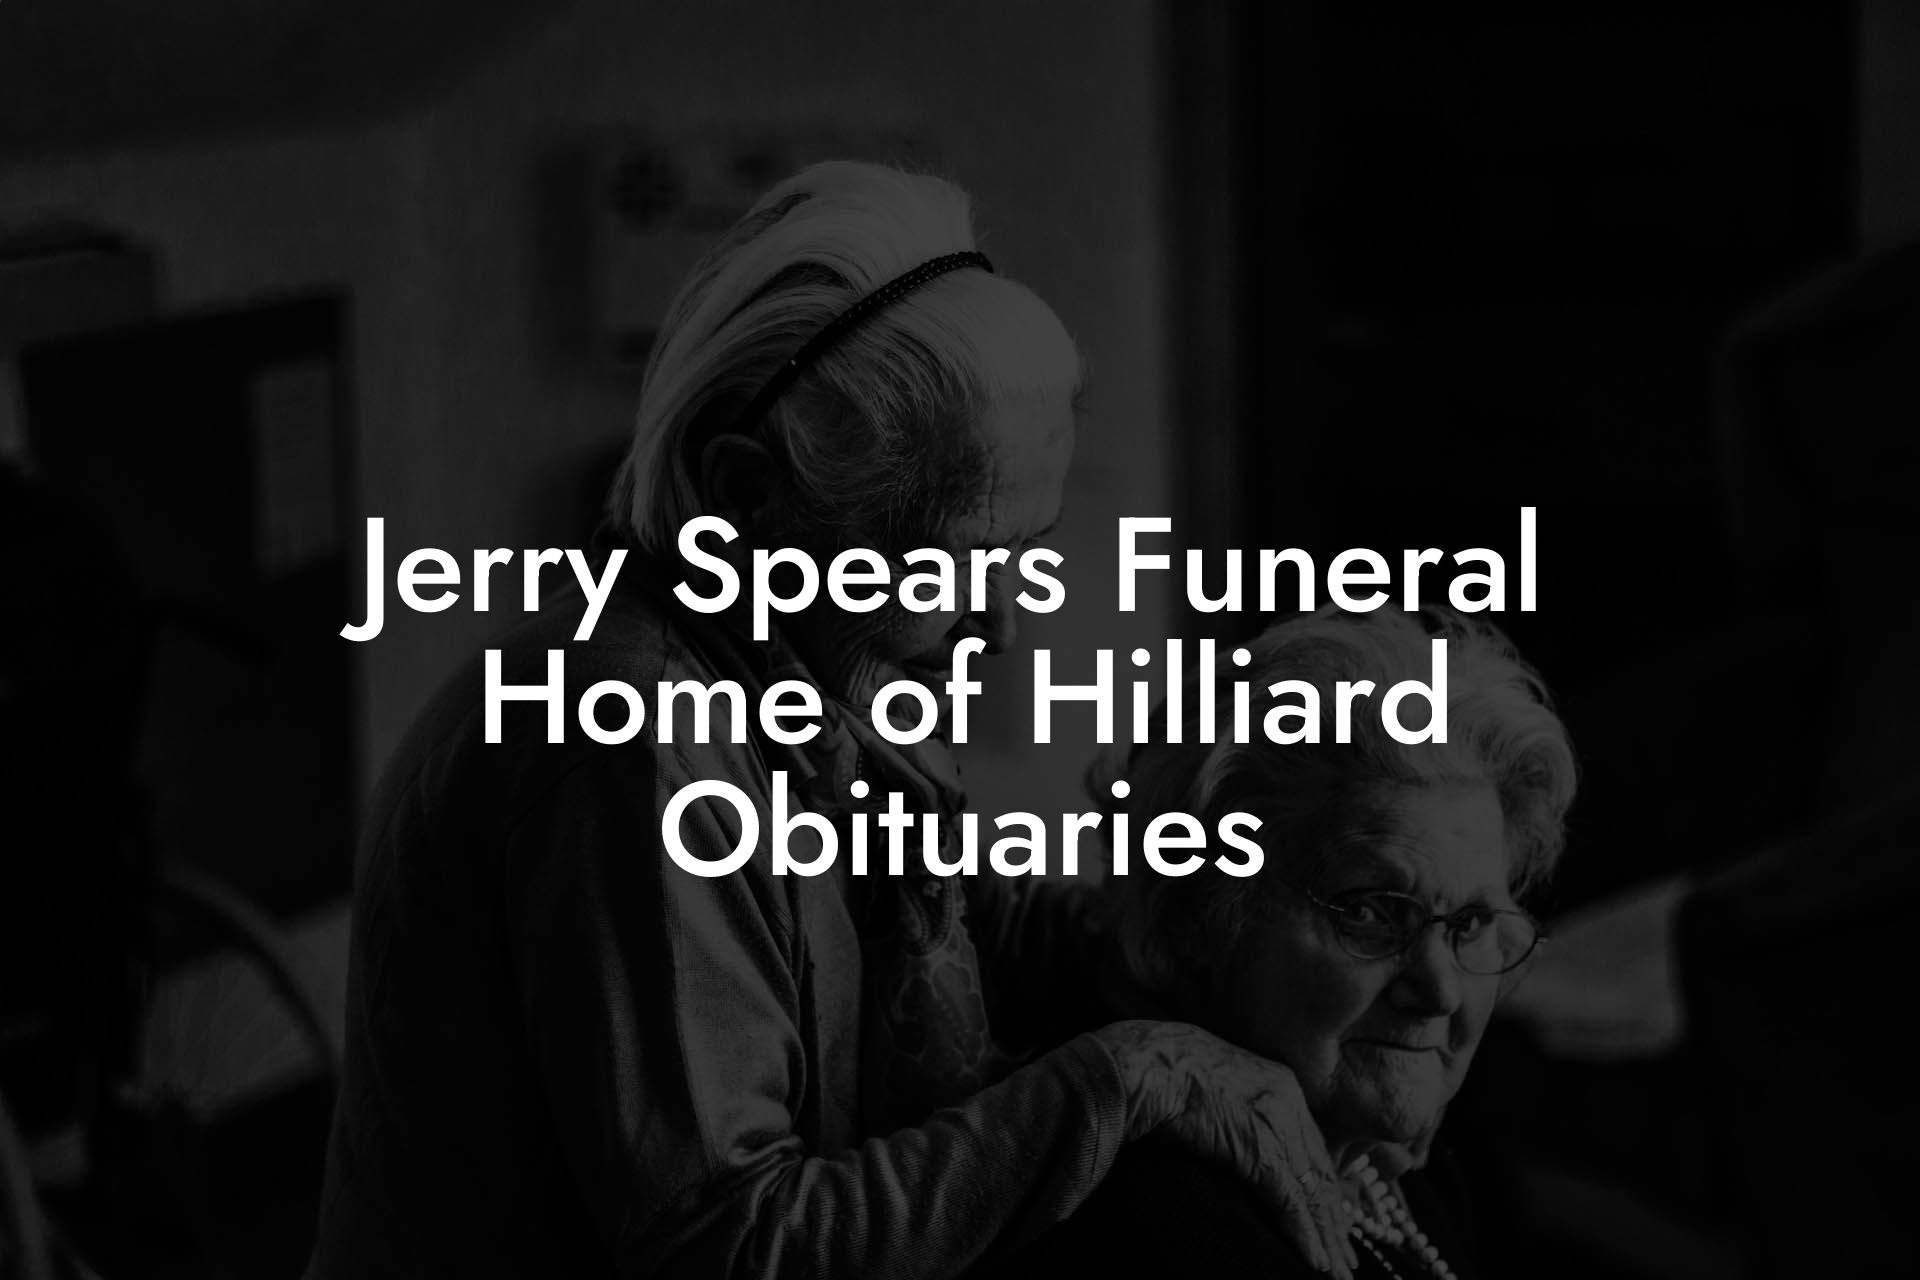 Jerry Spears Funeral Home of Hilliard Obituaries